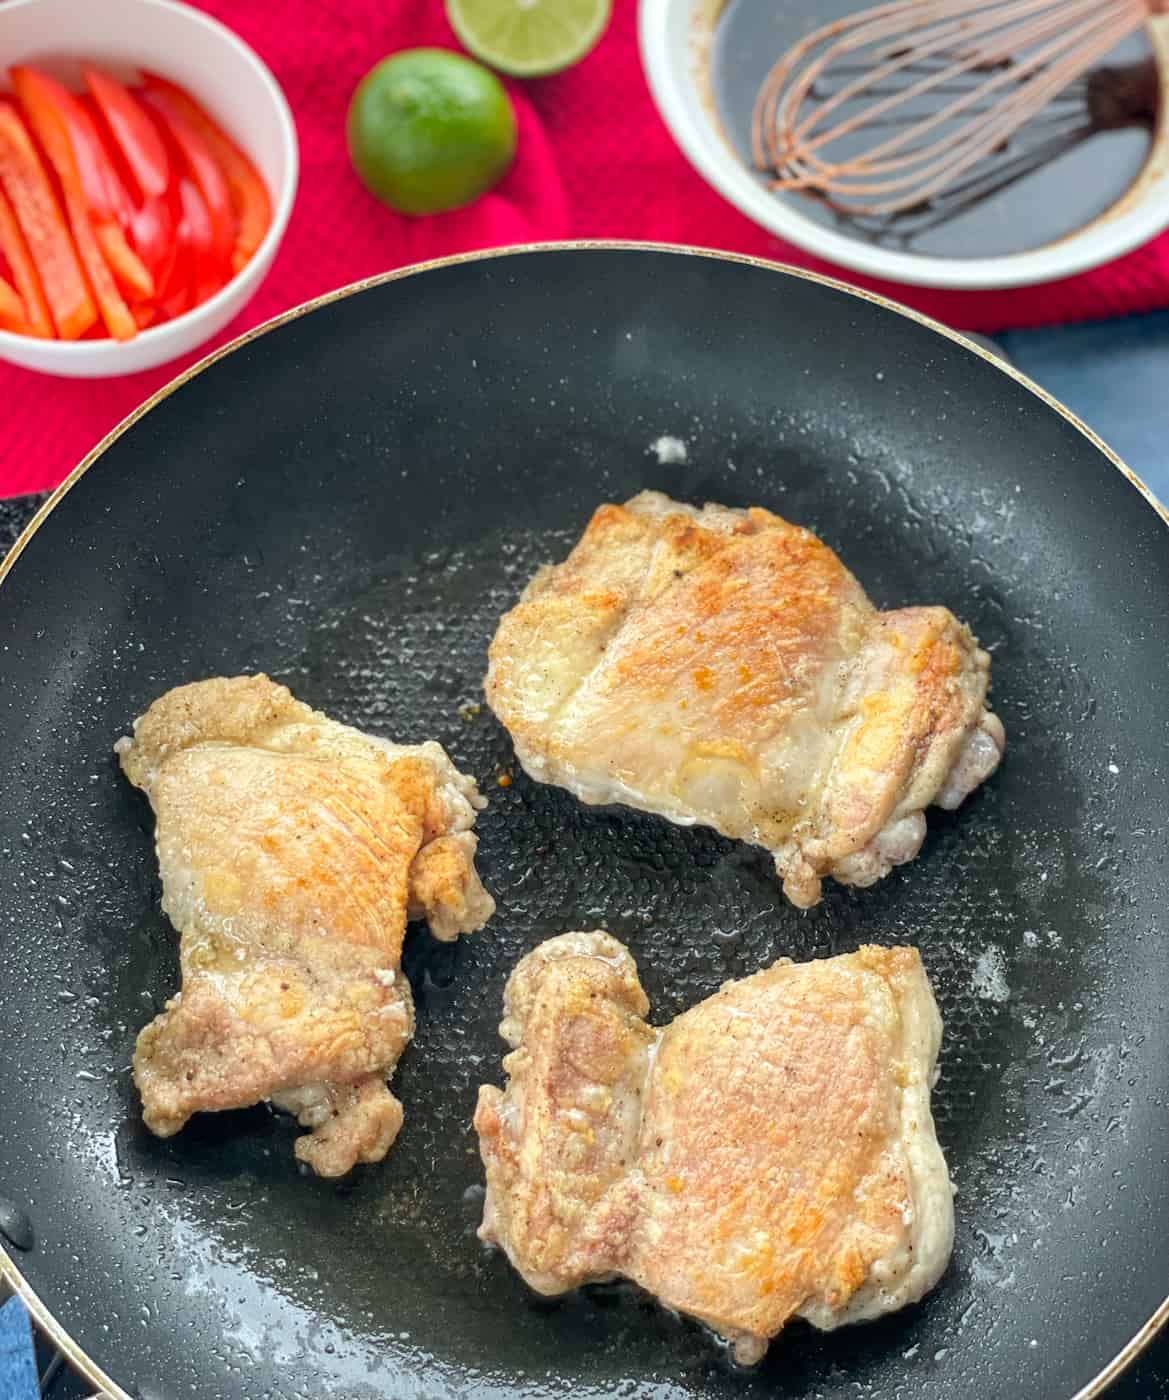 Pan fry the chicken for the sticky asian stir fry